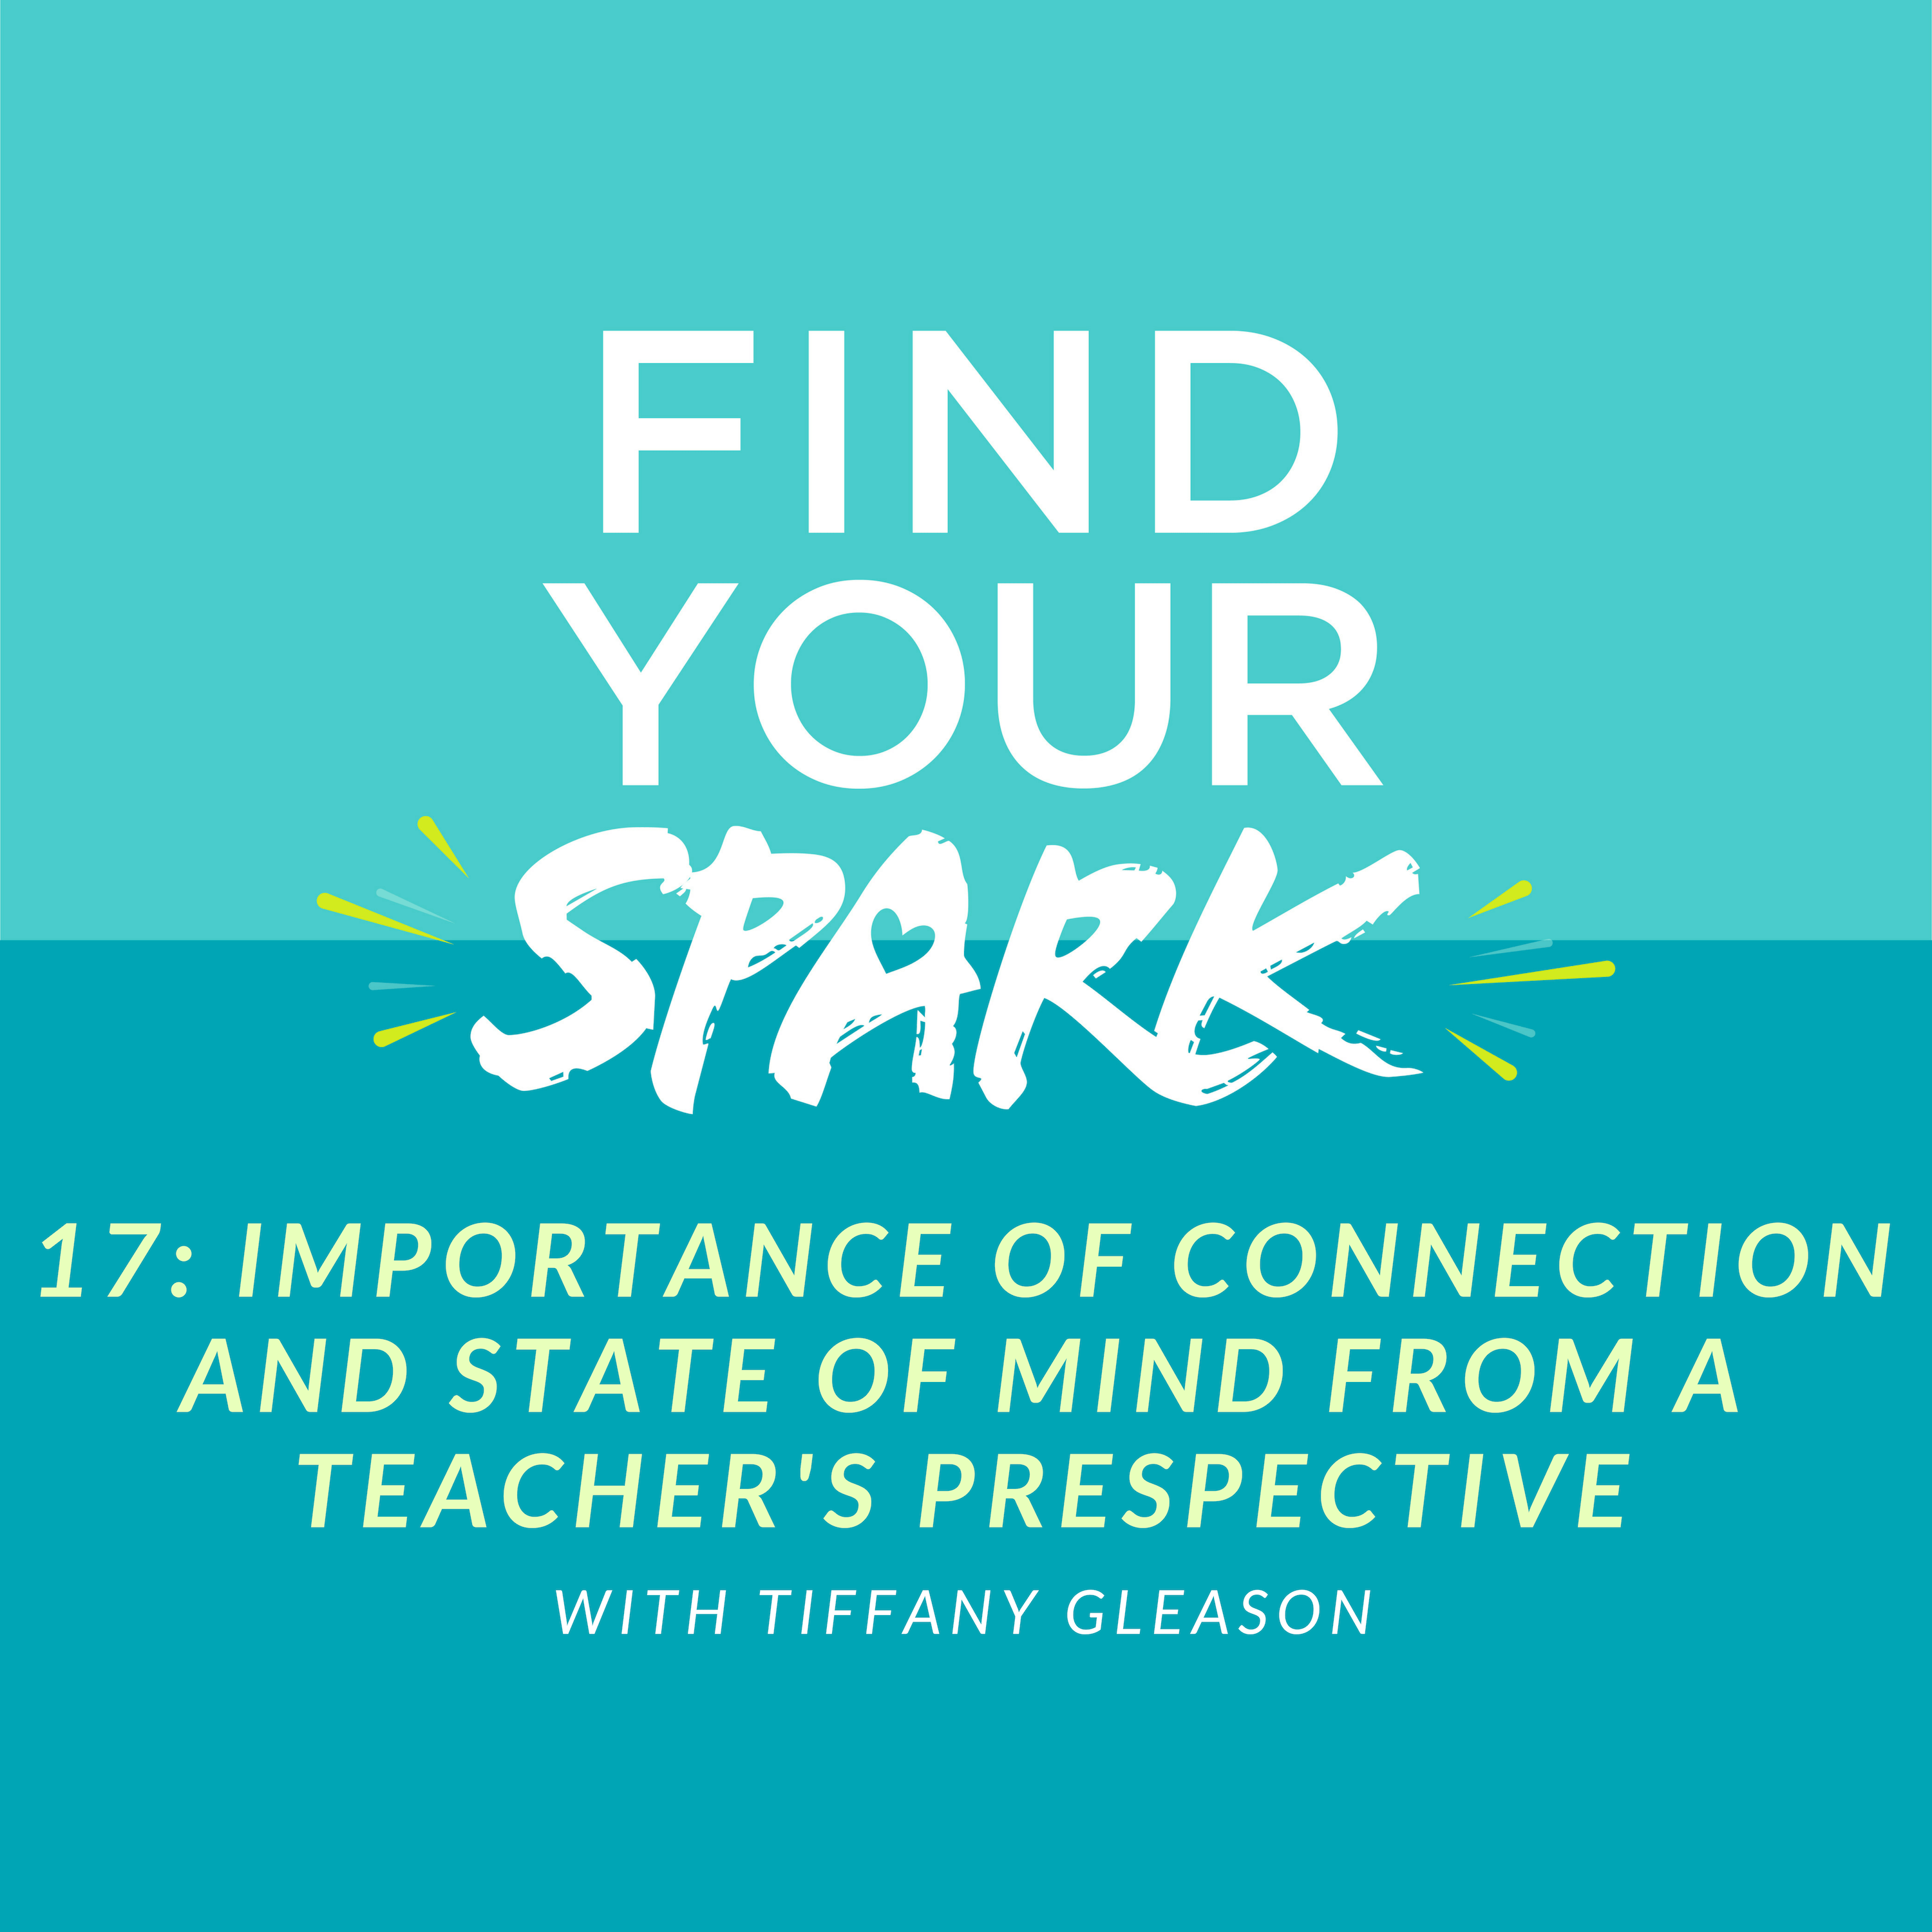 17: Importance of Connection and State of Mind from a Teacher's Perspective